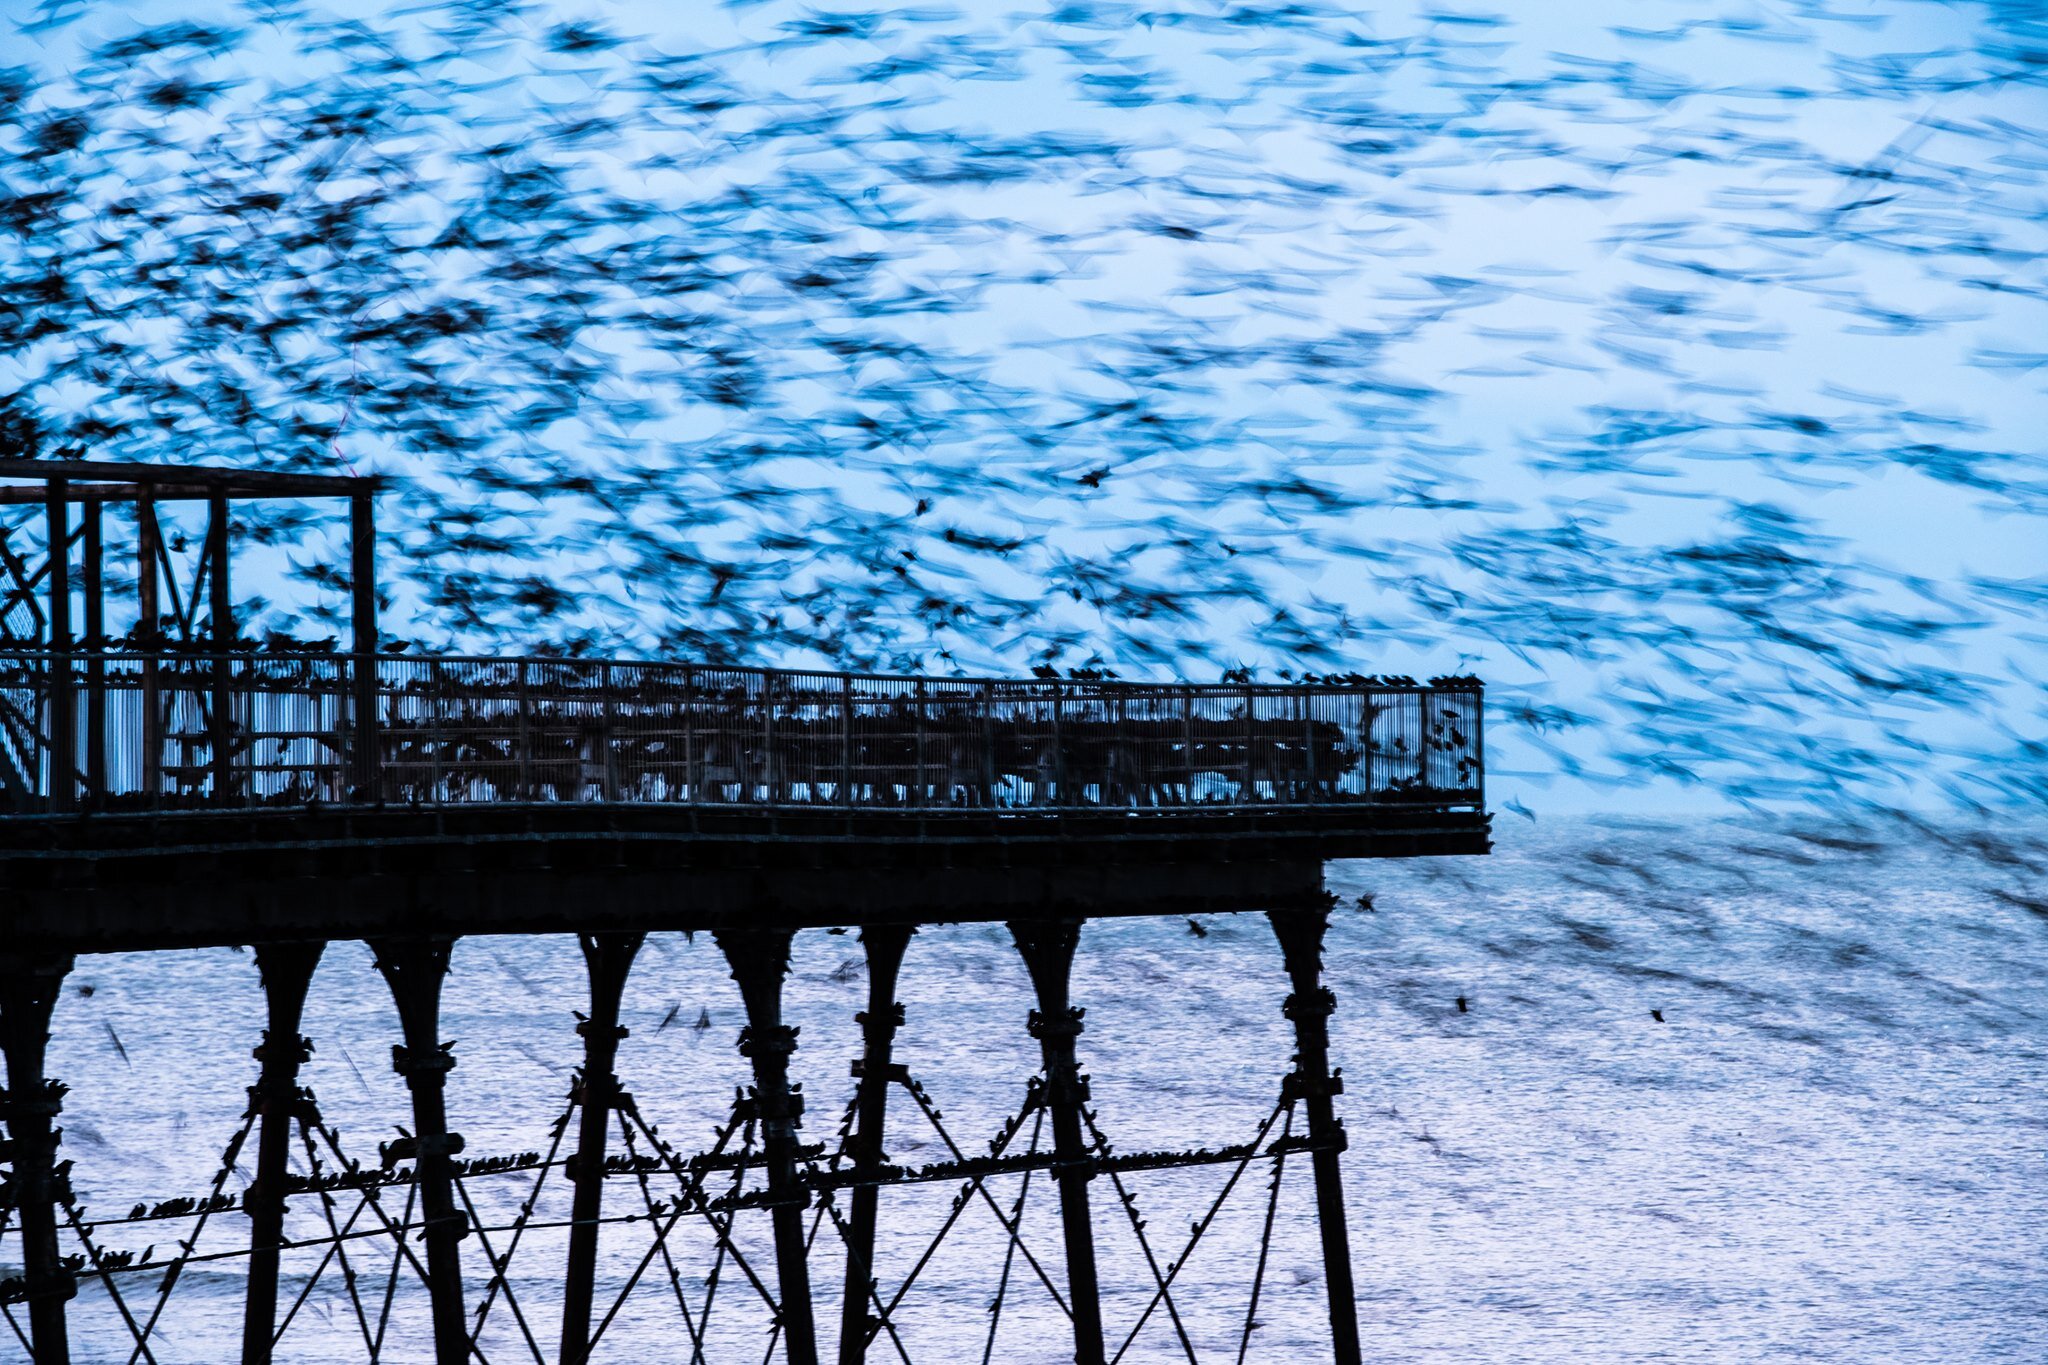 UK Weather : Starlings at dusk around the pier in Aberystwyth Wales